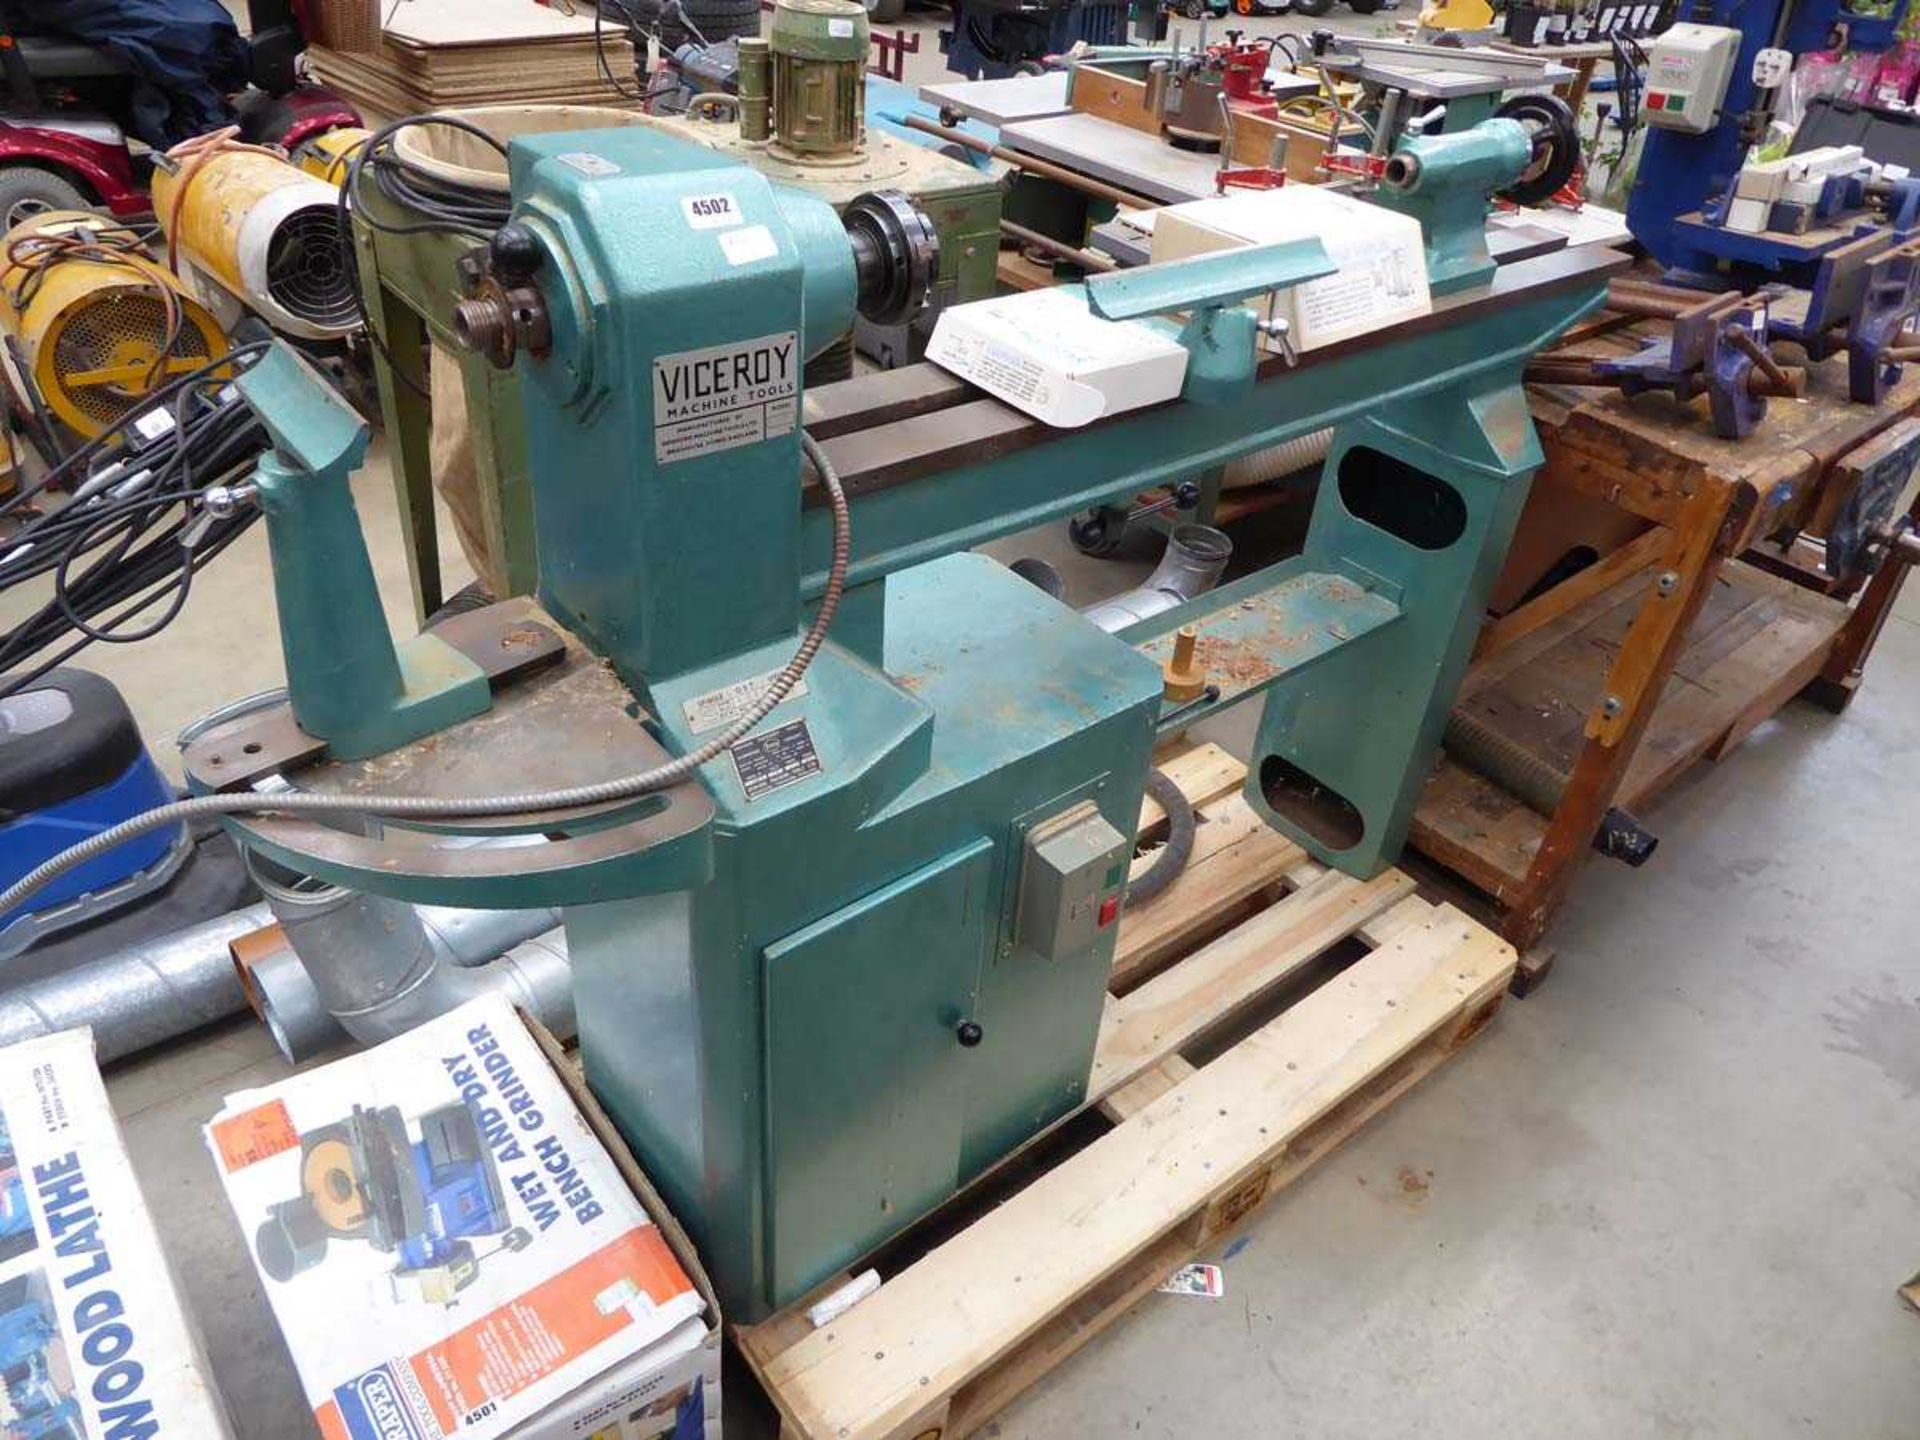 Viceroy 3 phase lathe with chuck system